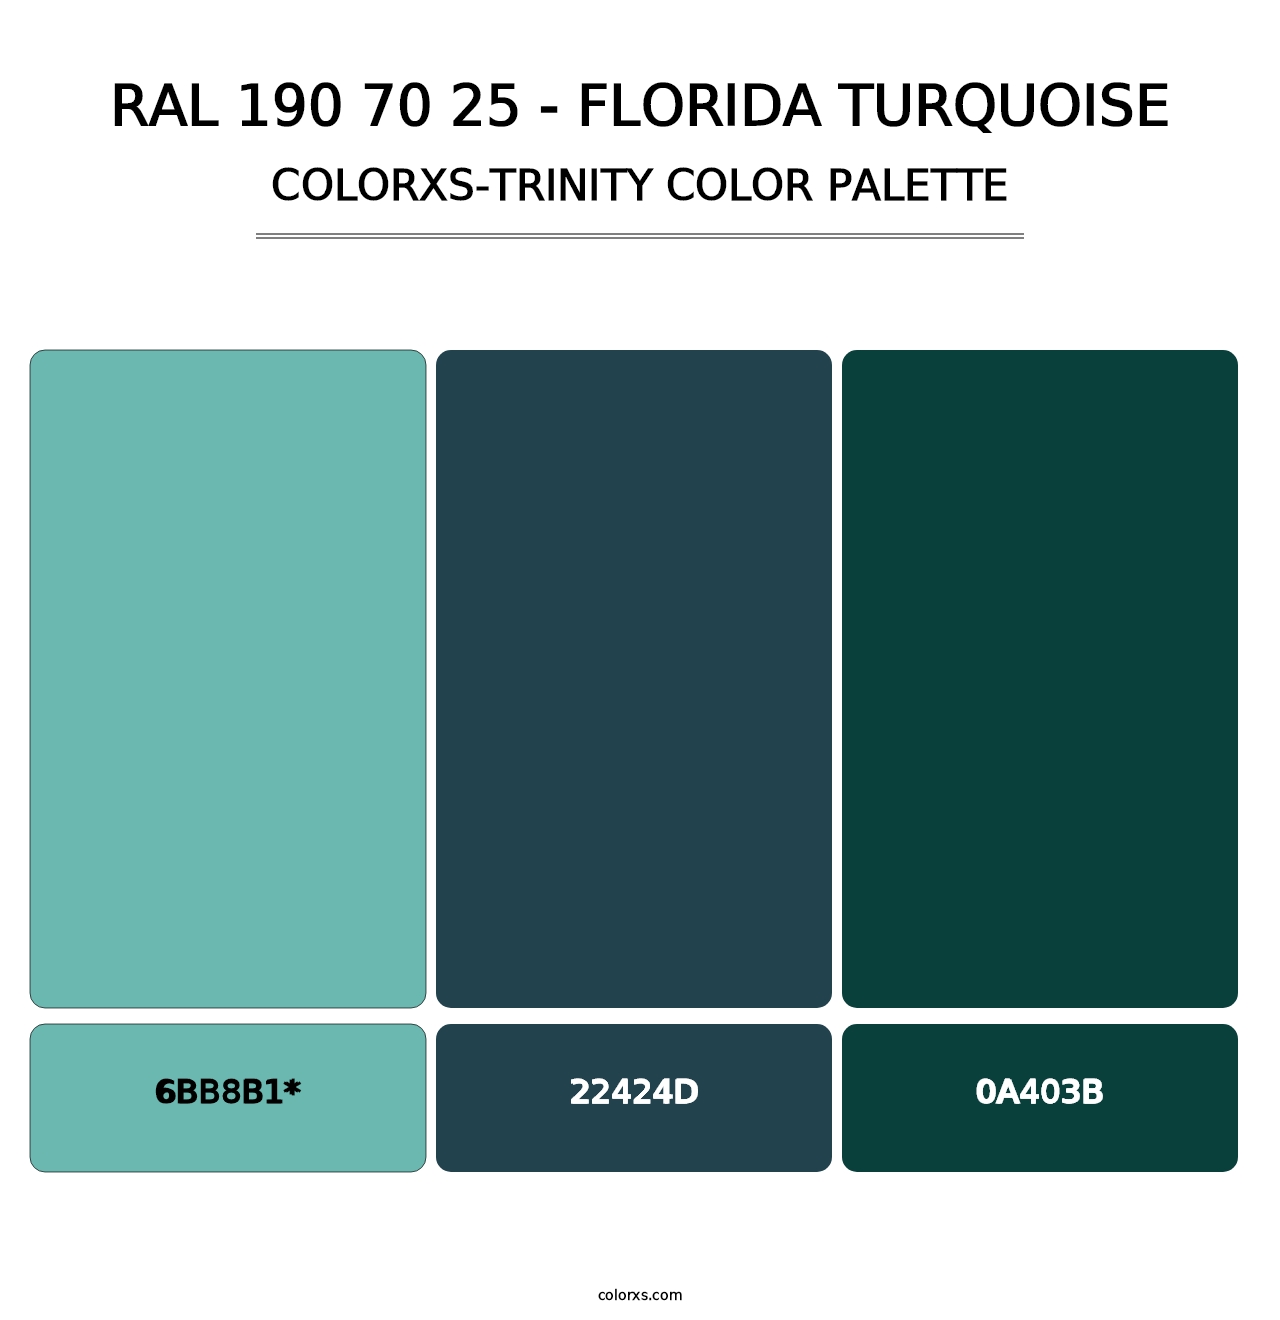 RAL 190 70 25 - Florida Turquoise - Colorxs Trinity Palette